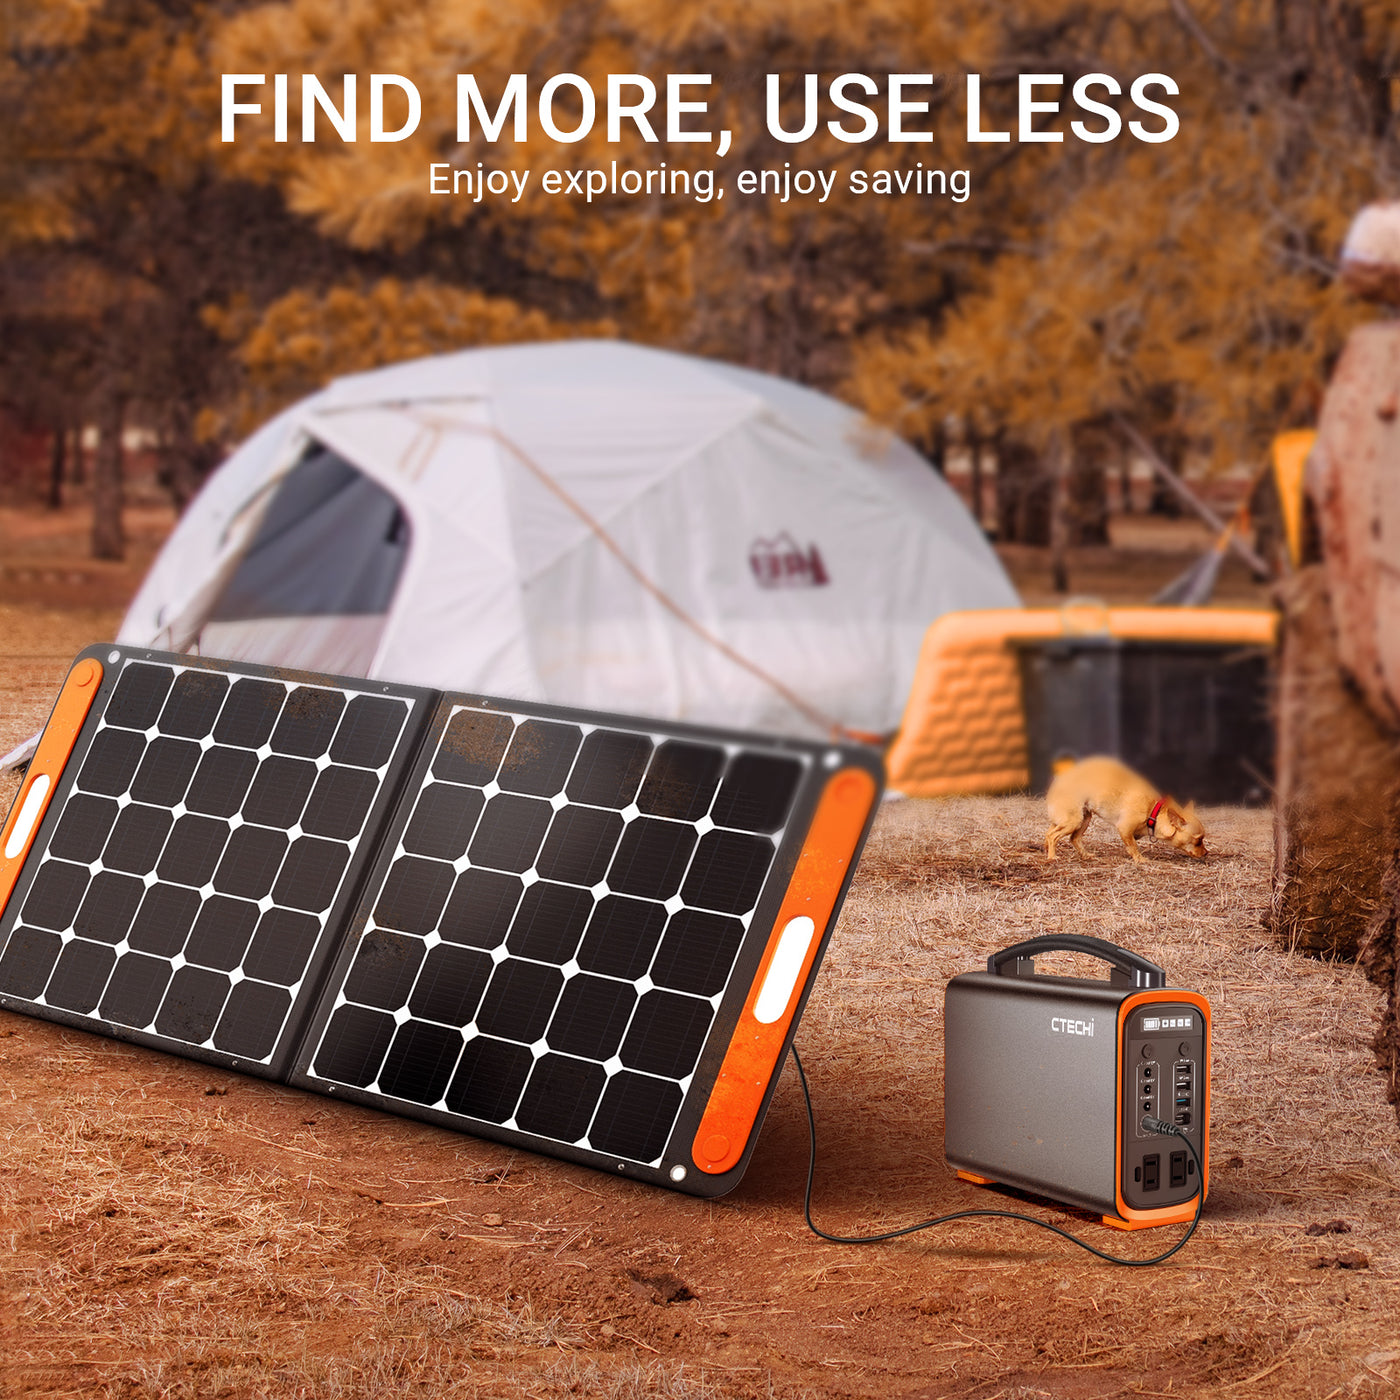 【Refurbished】 CTECHi GT200 Portable Power Station 200W / 240Wh LiFePO4 Battery